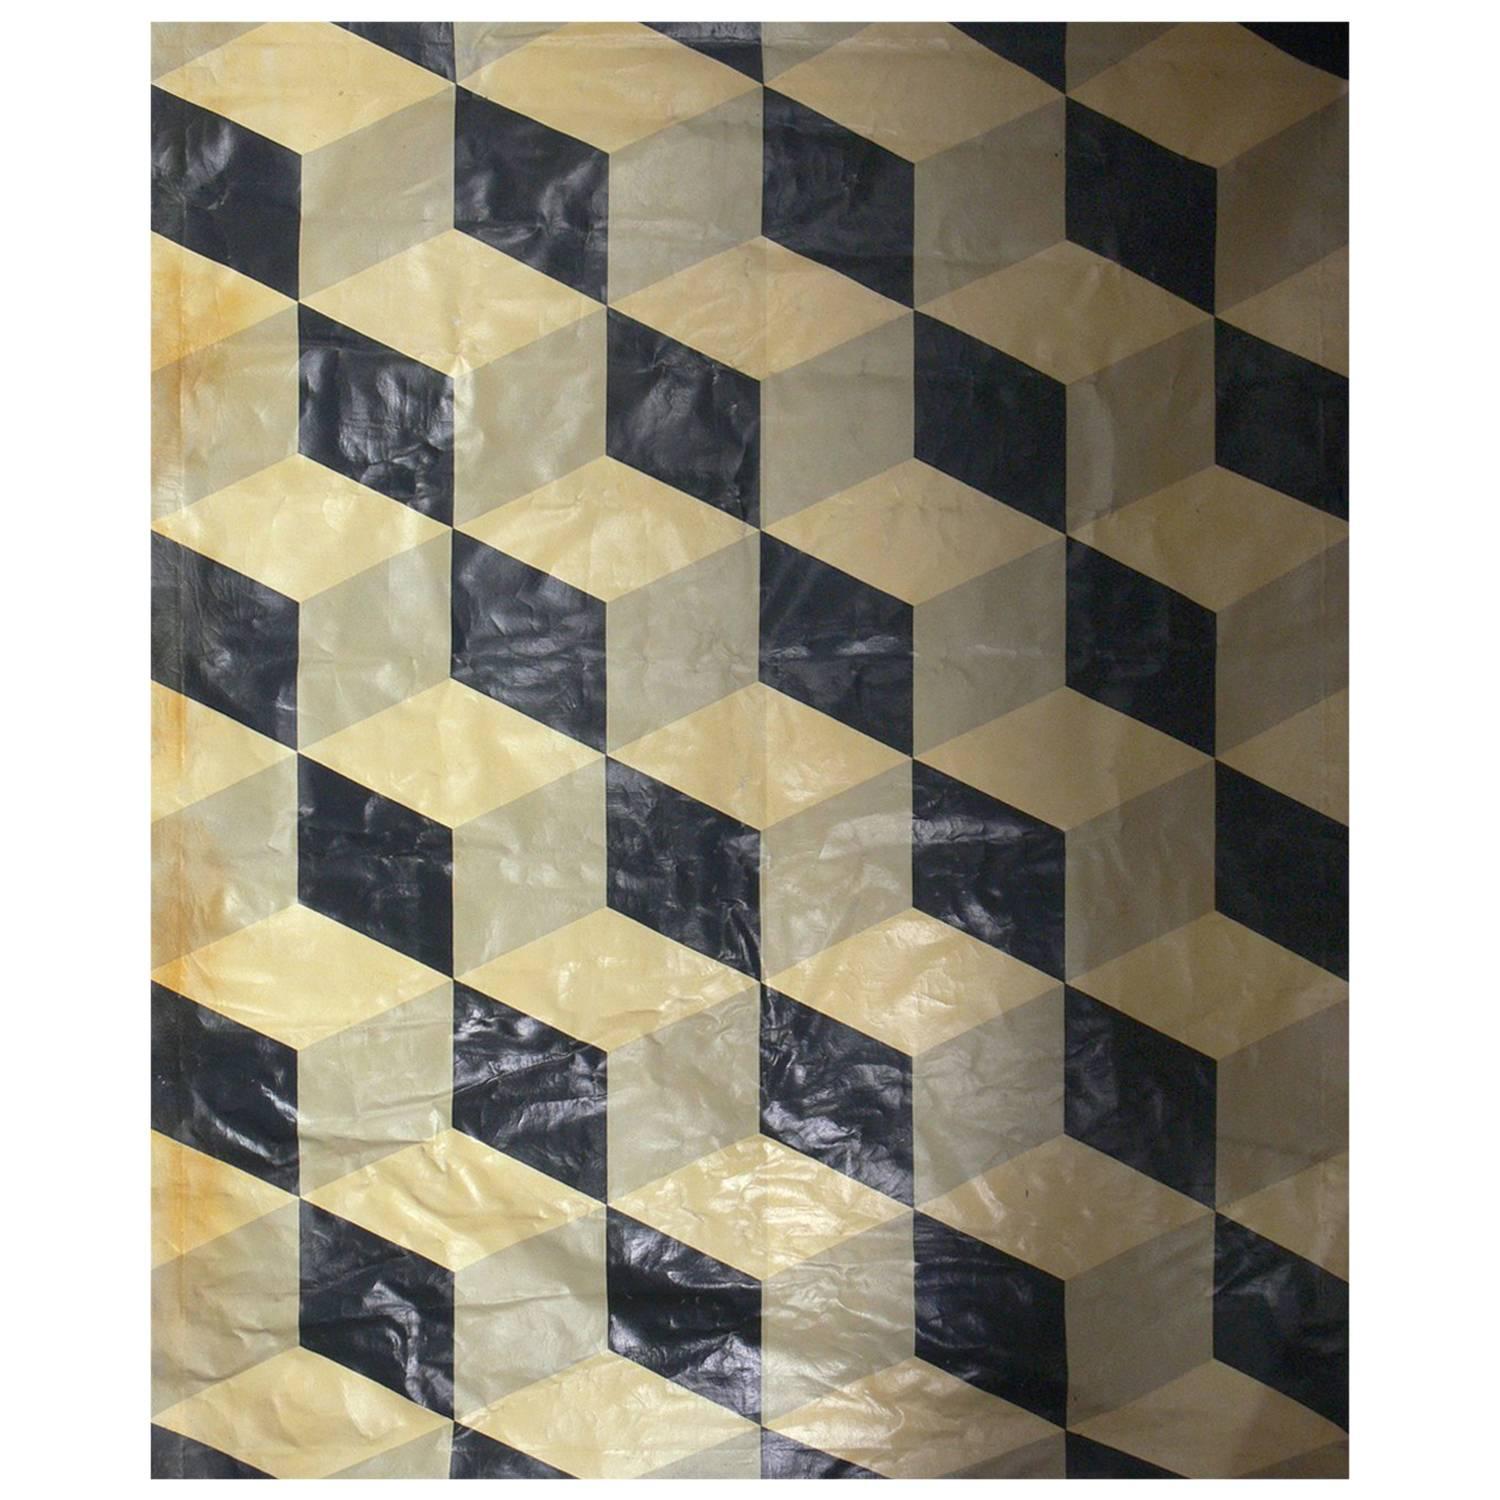 Large-Scale Geometric Painted Floor Canvas